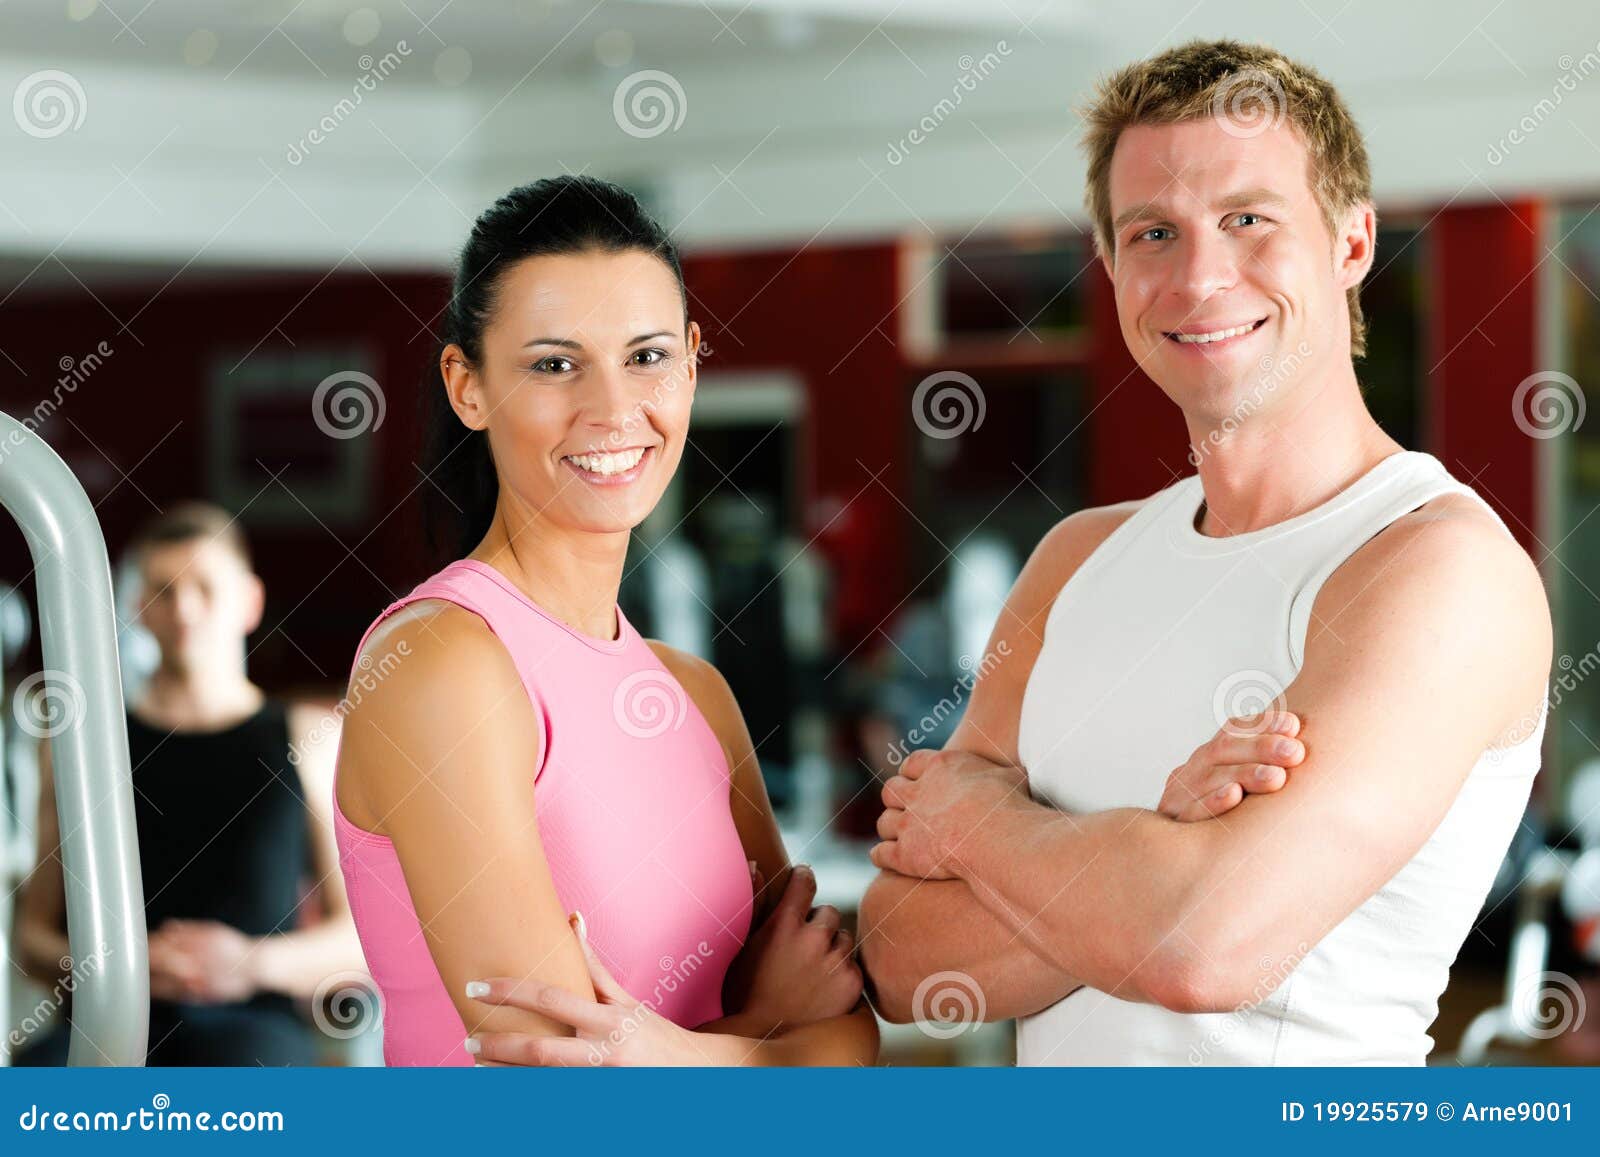 sportive couple in gym